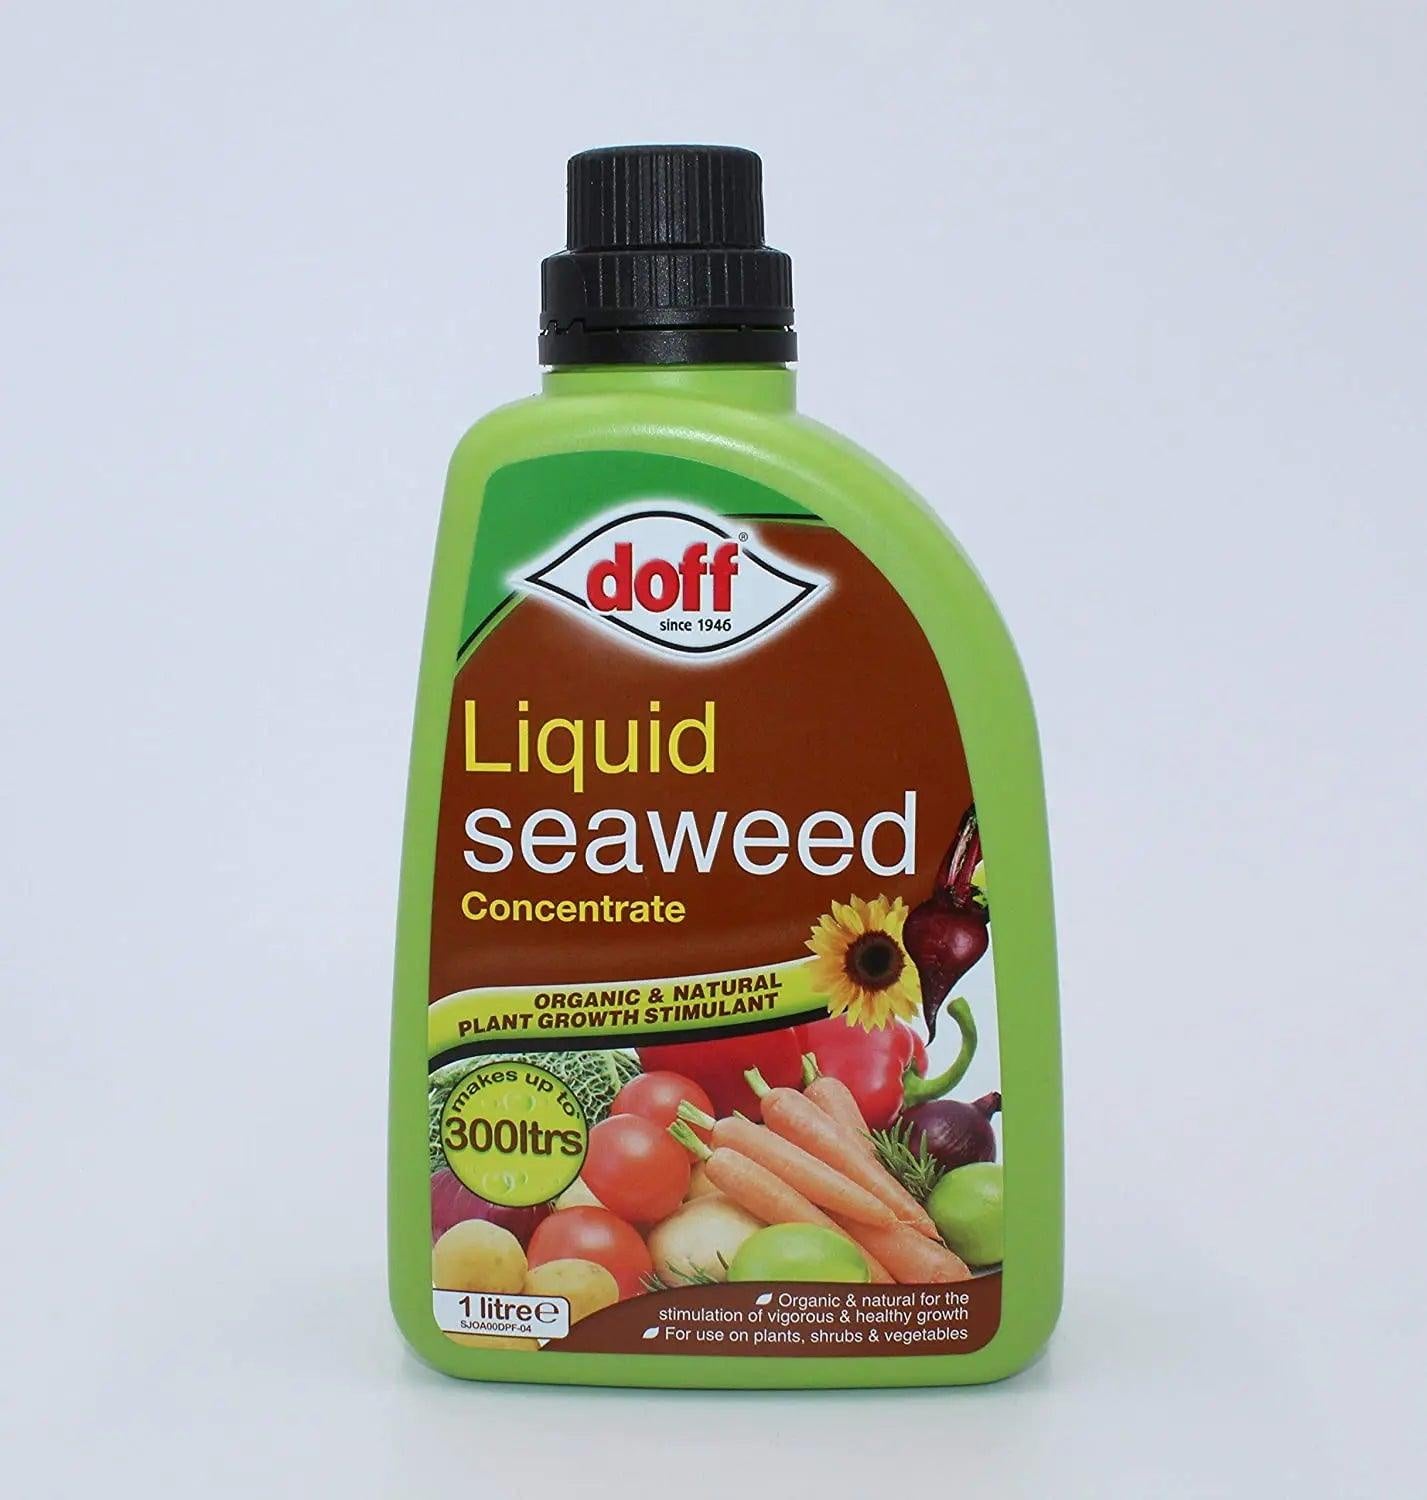 Doff Liquid Seaweed Concentrated Multi-Purpose Feed - 1Litre (4 pack)